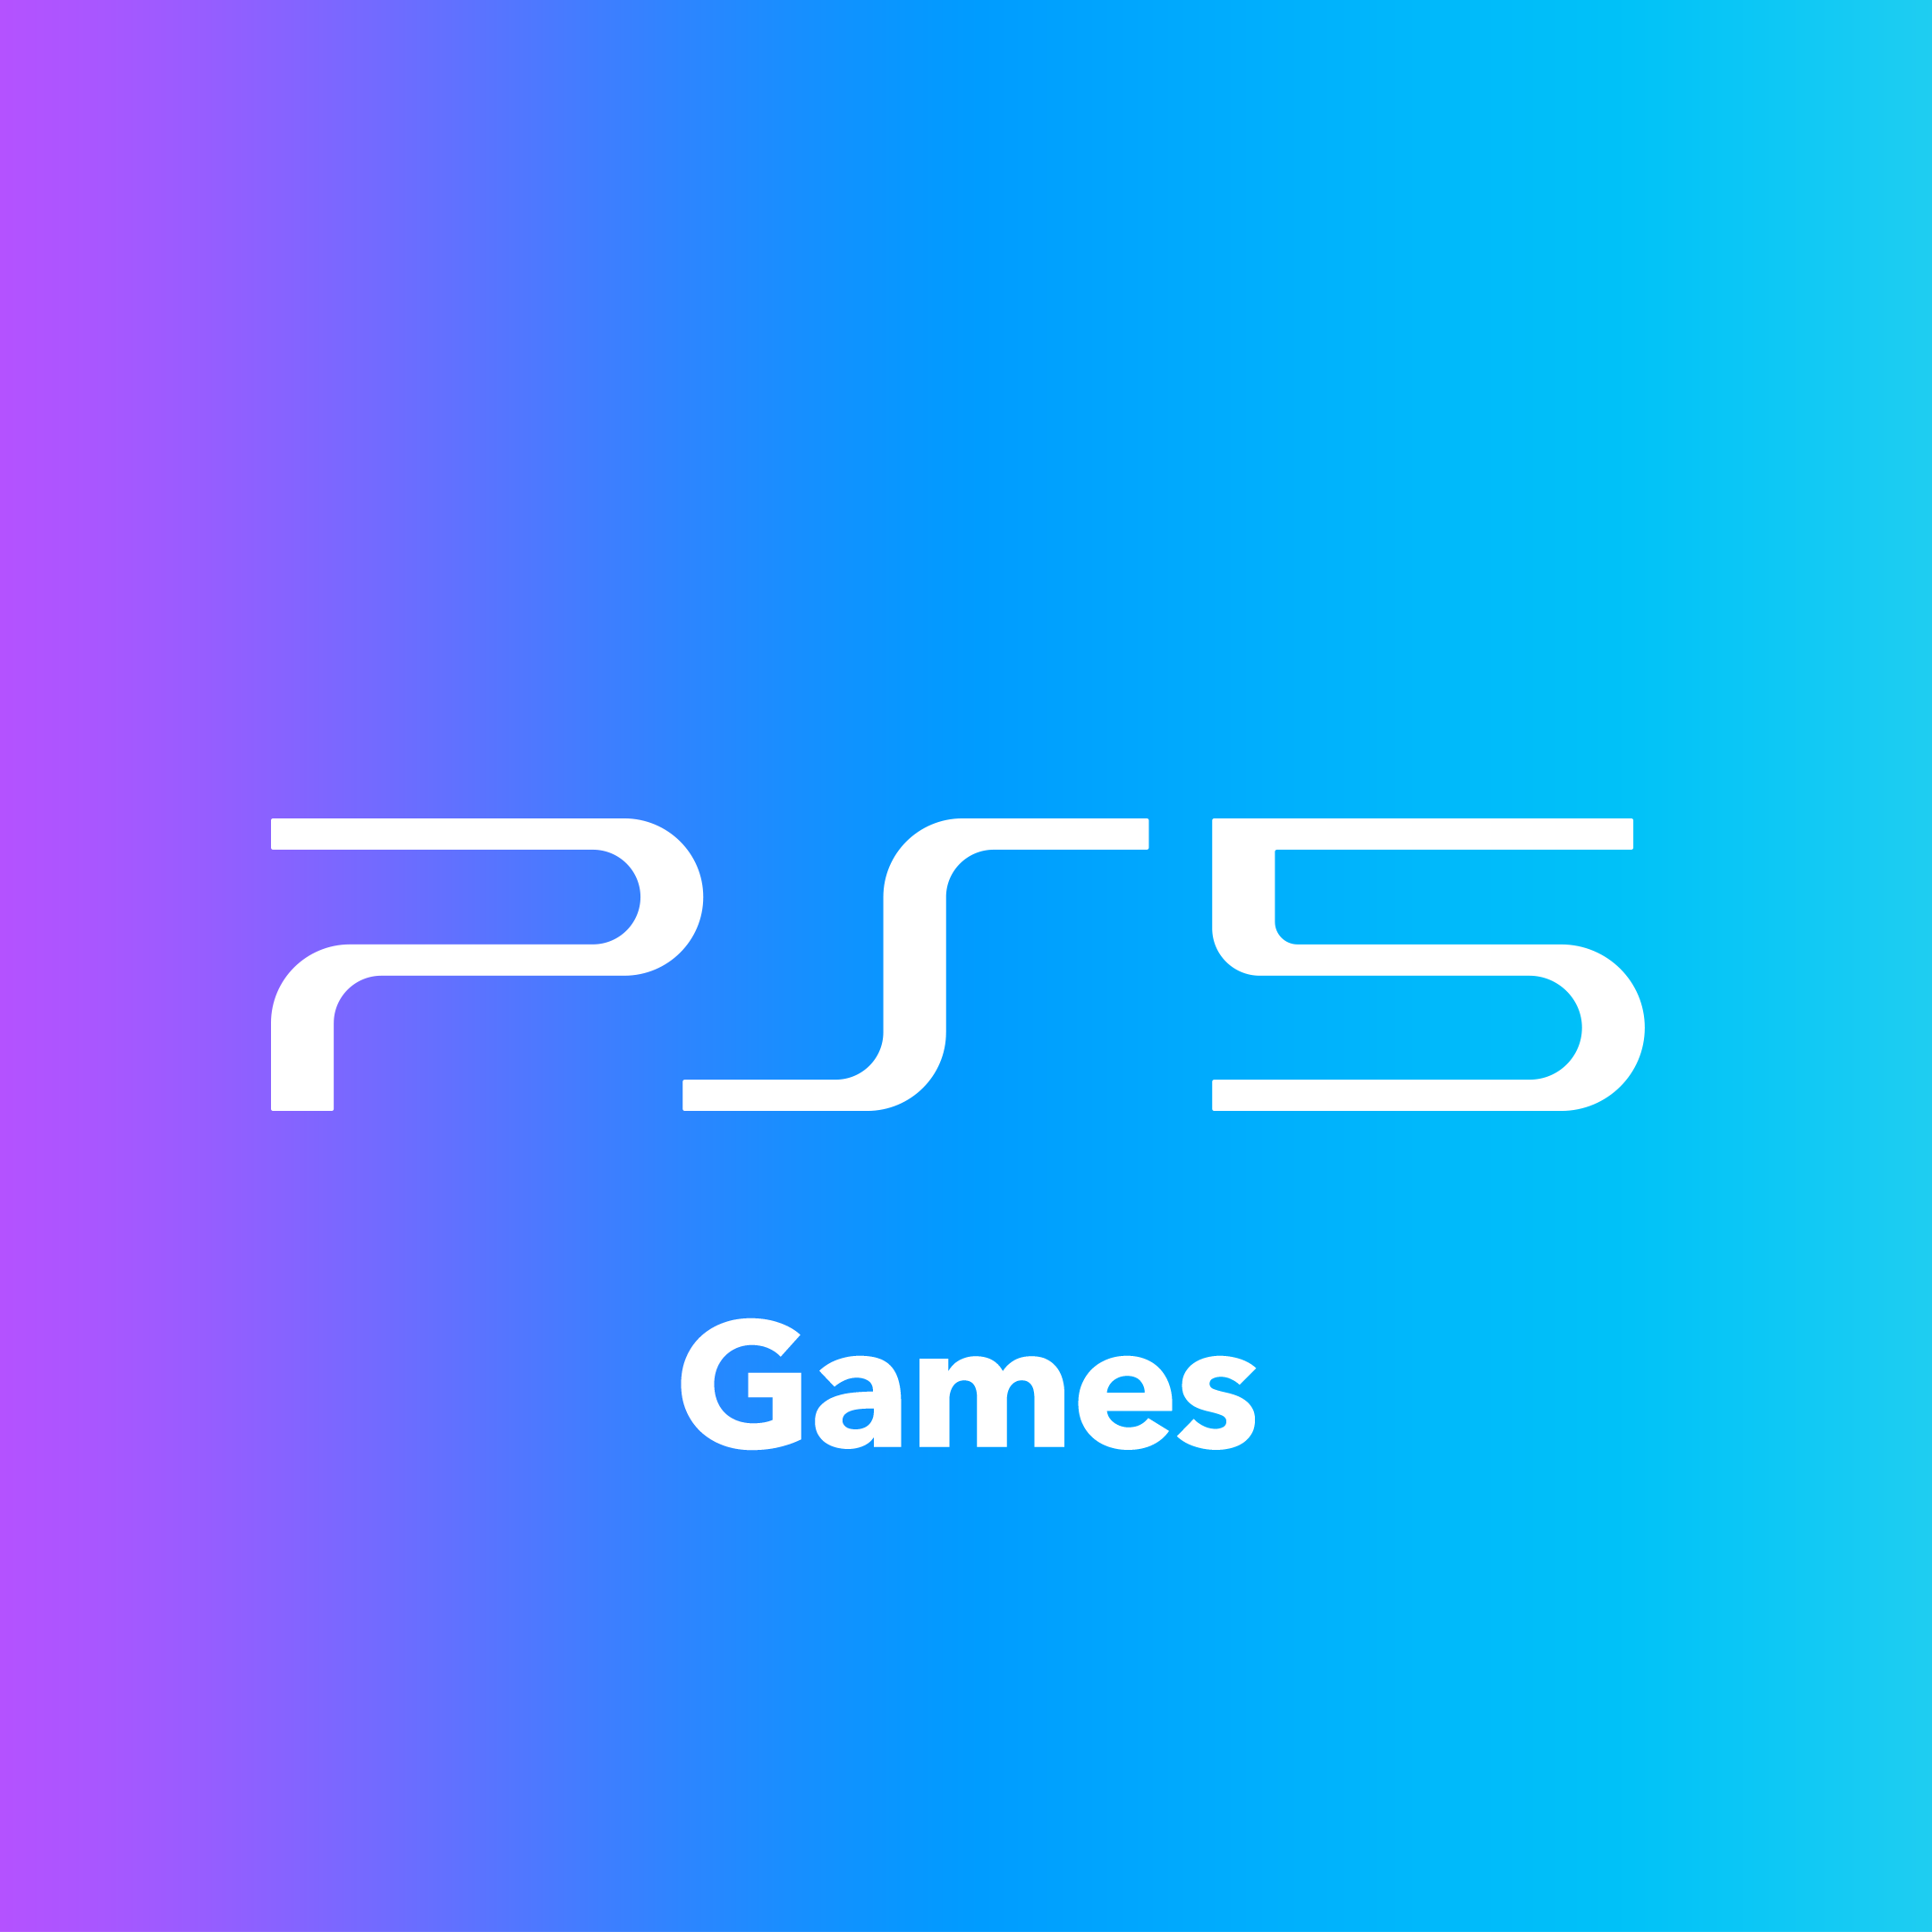 Official PlayStation™Store Singapore